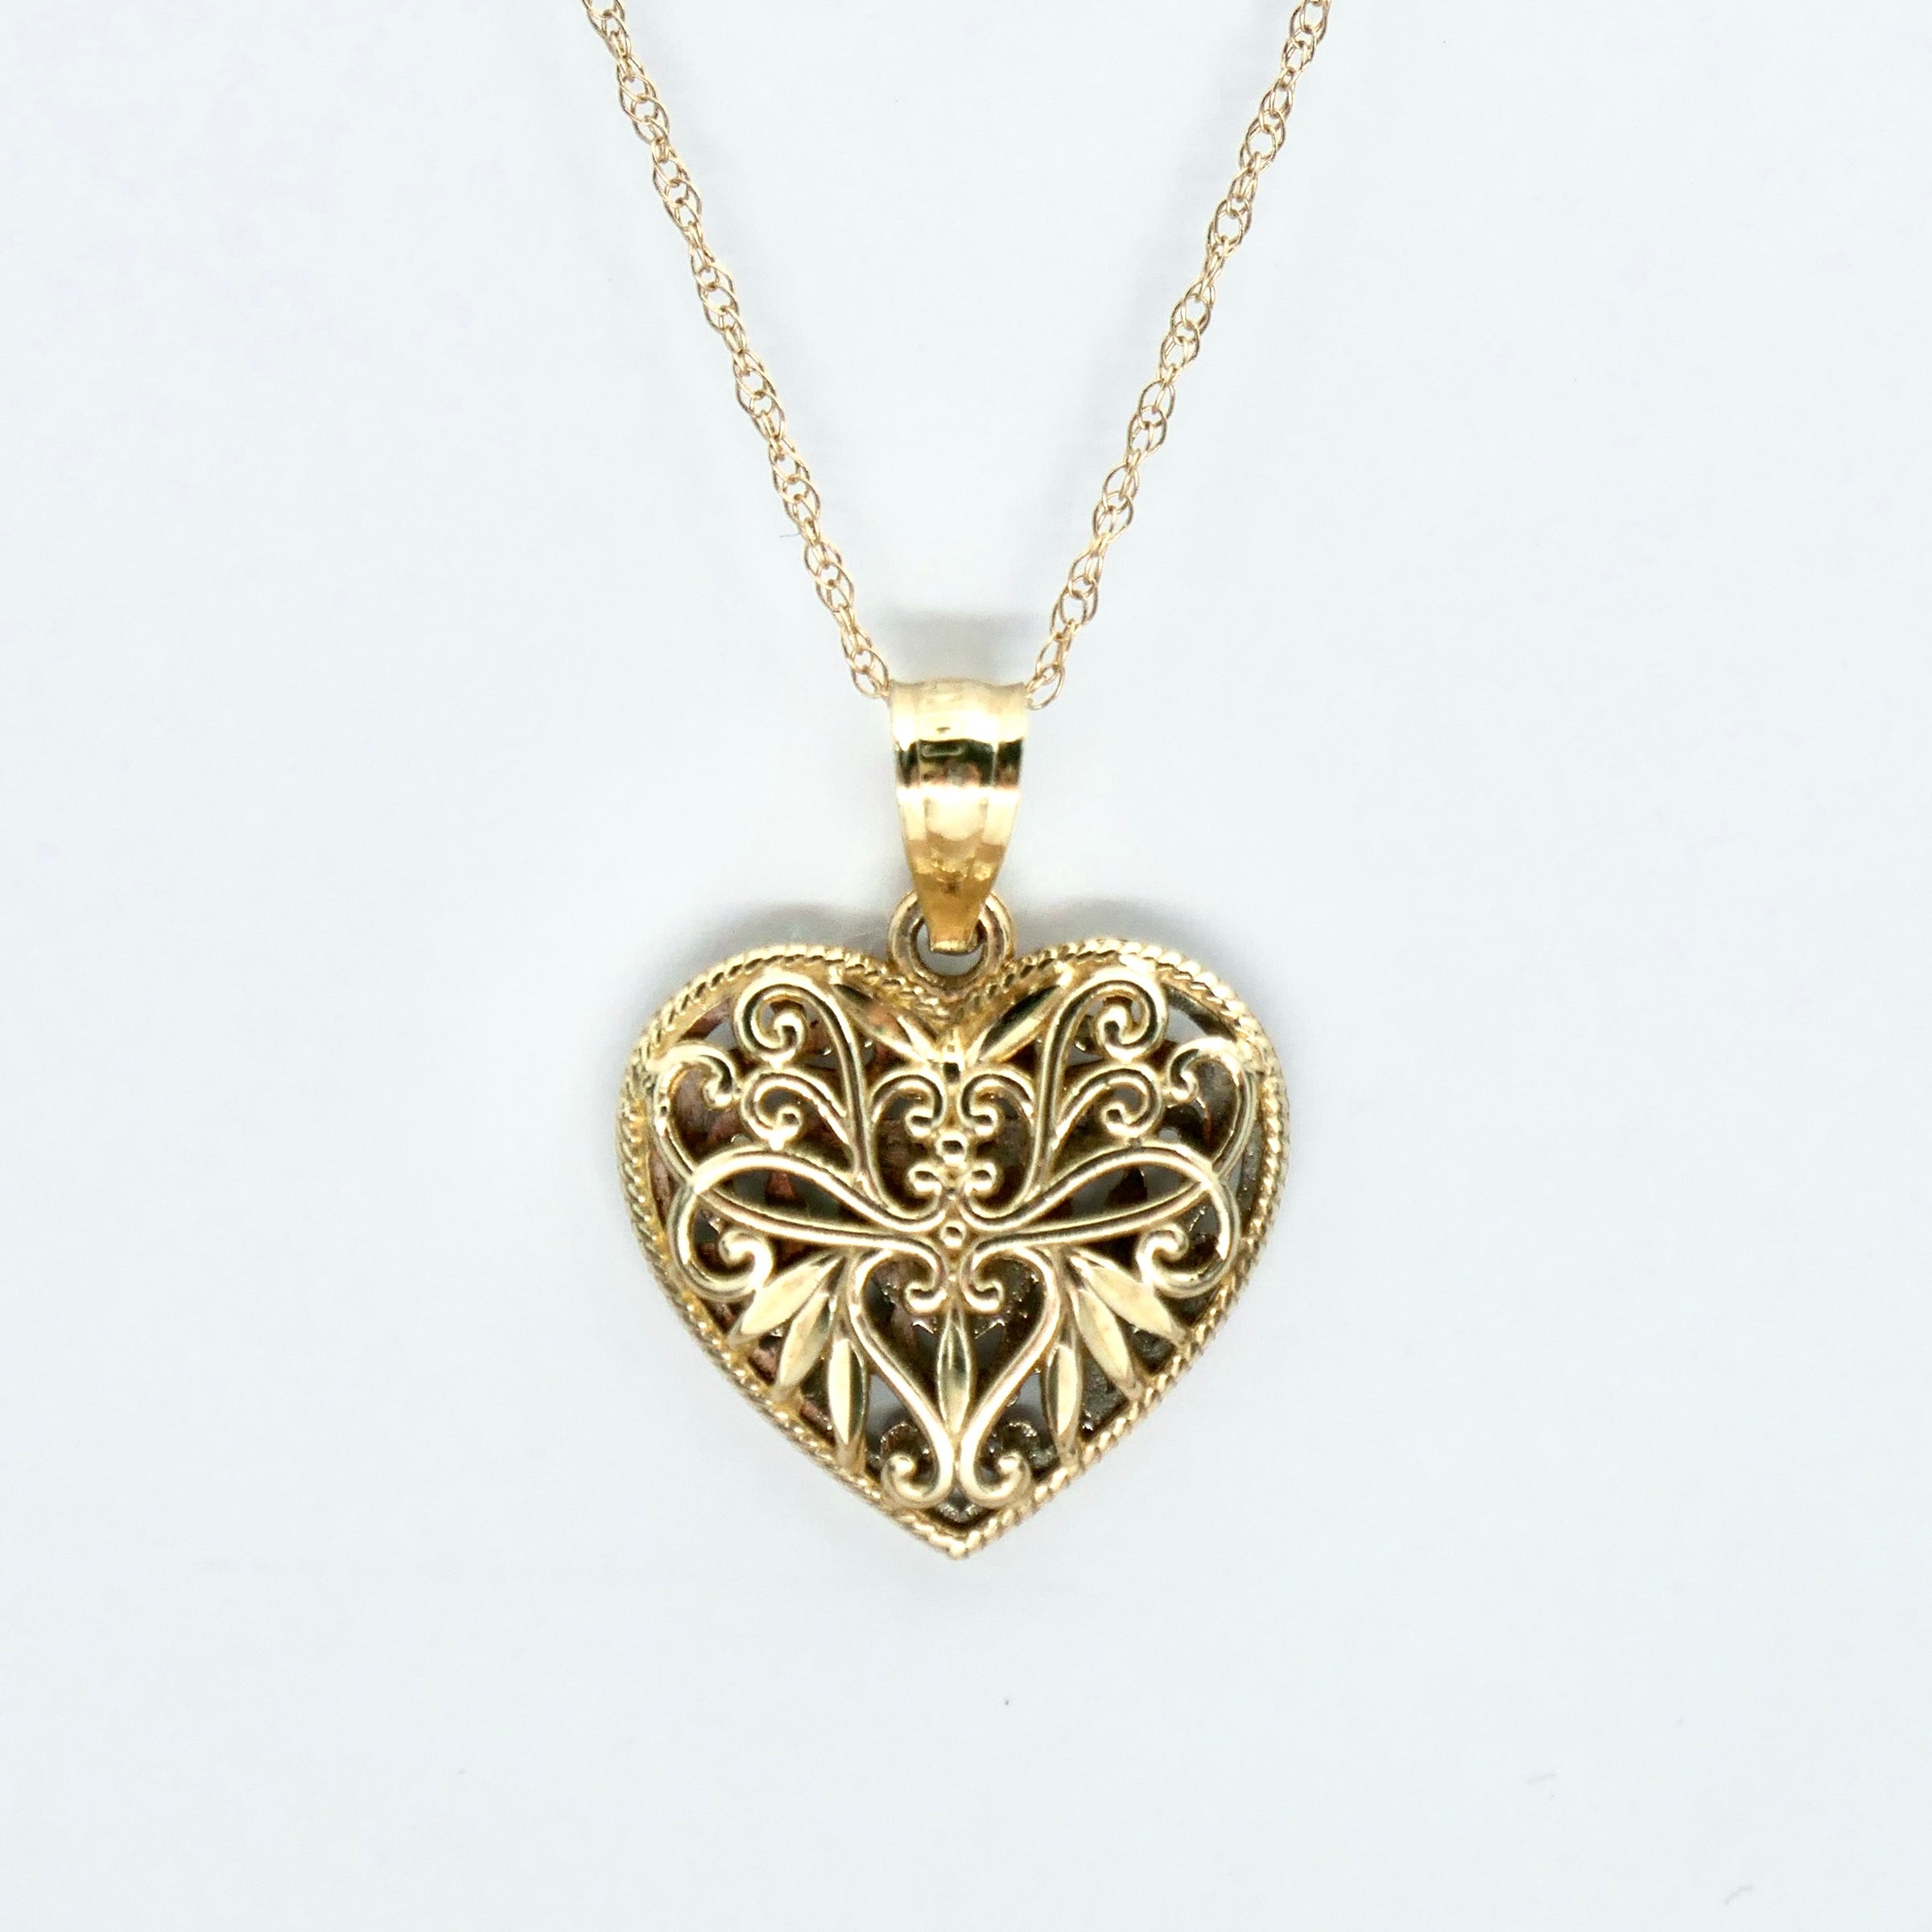 10K Yellow and White Gold Reversible Pendant w/ 10K Chain